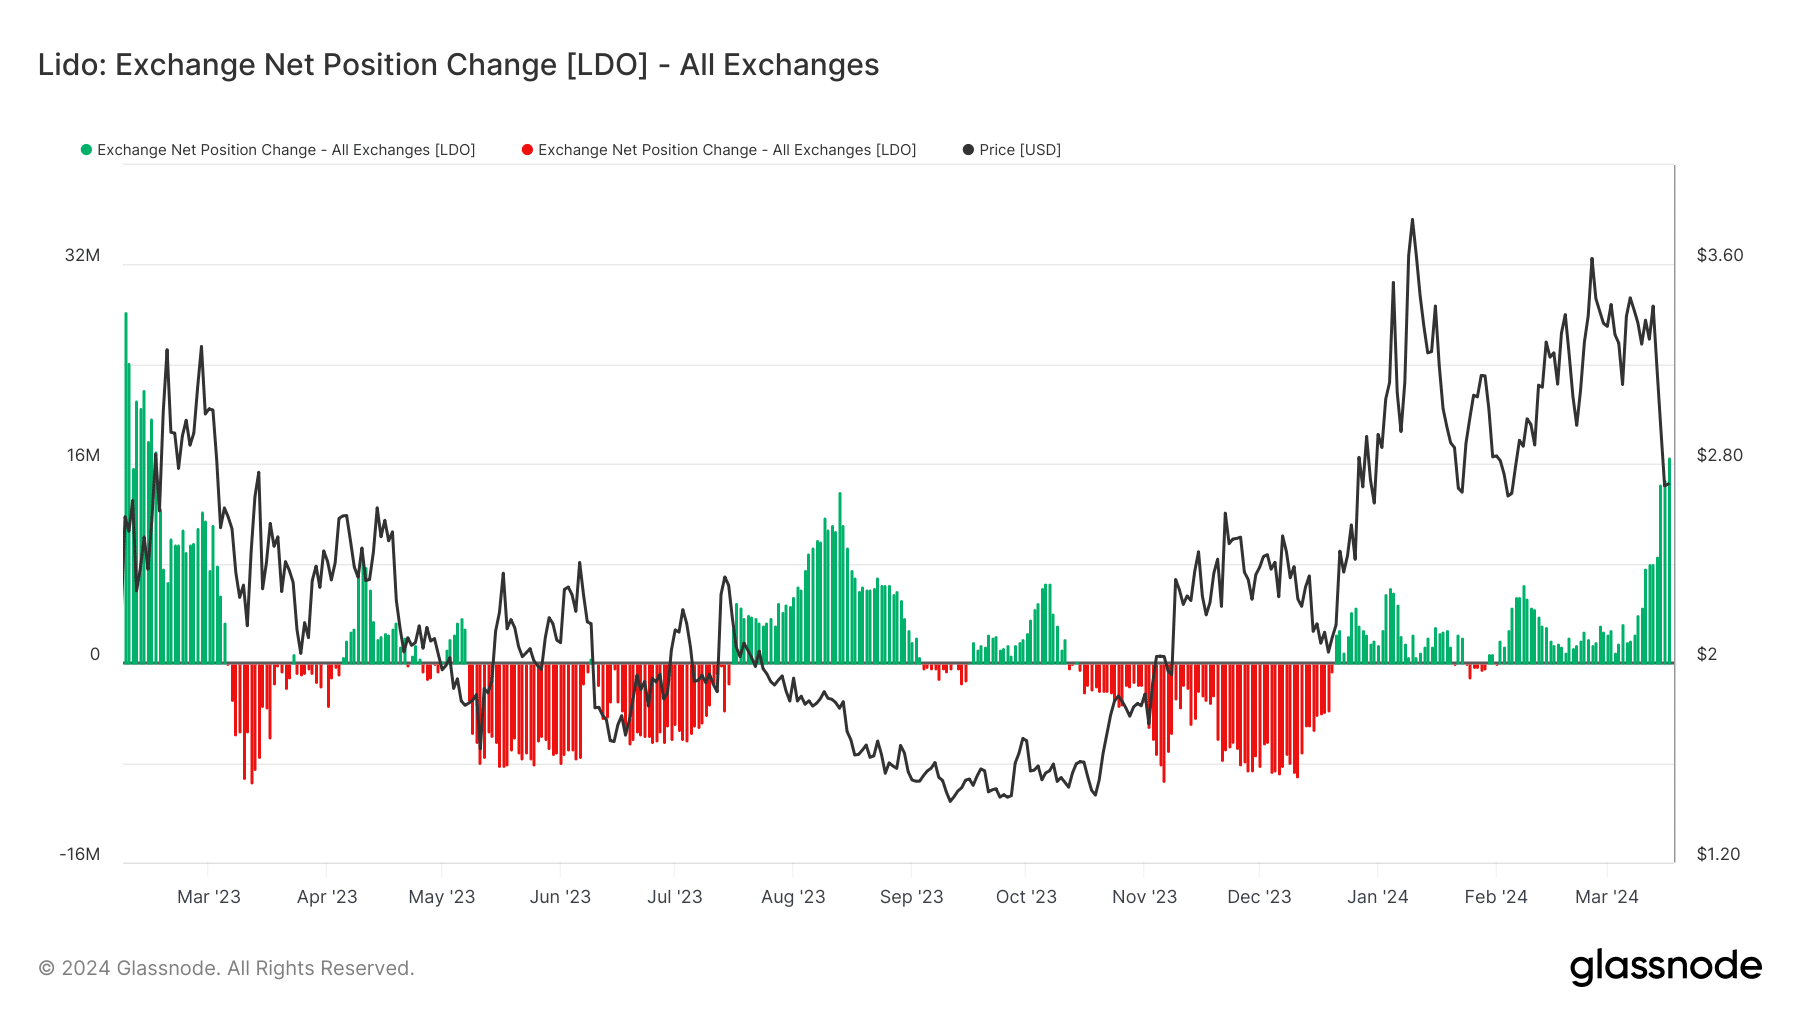 LDO exchange data indicating a possible price decline